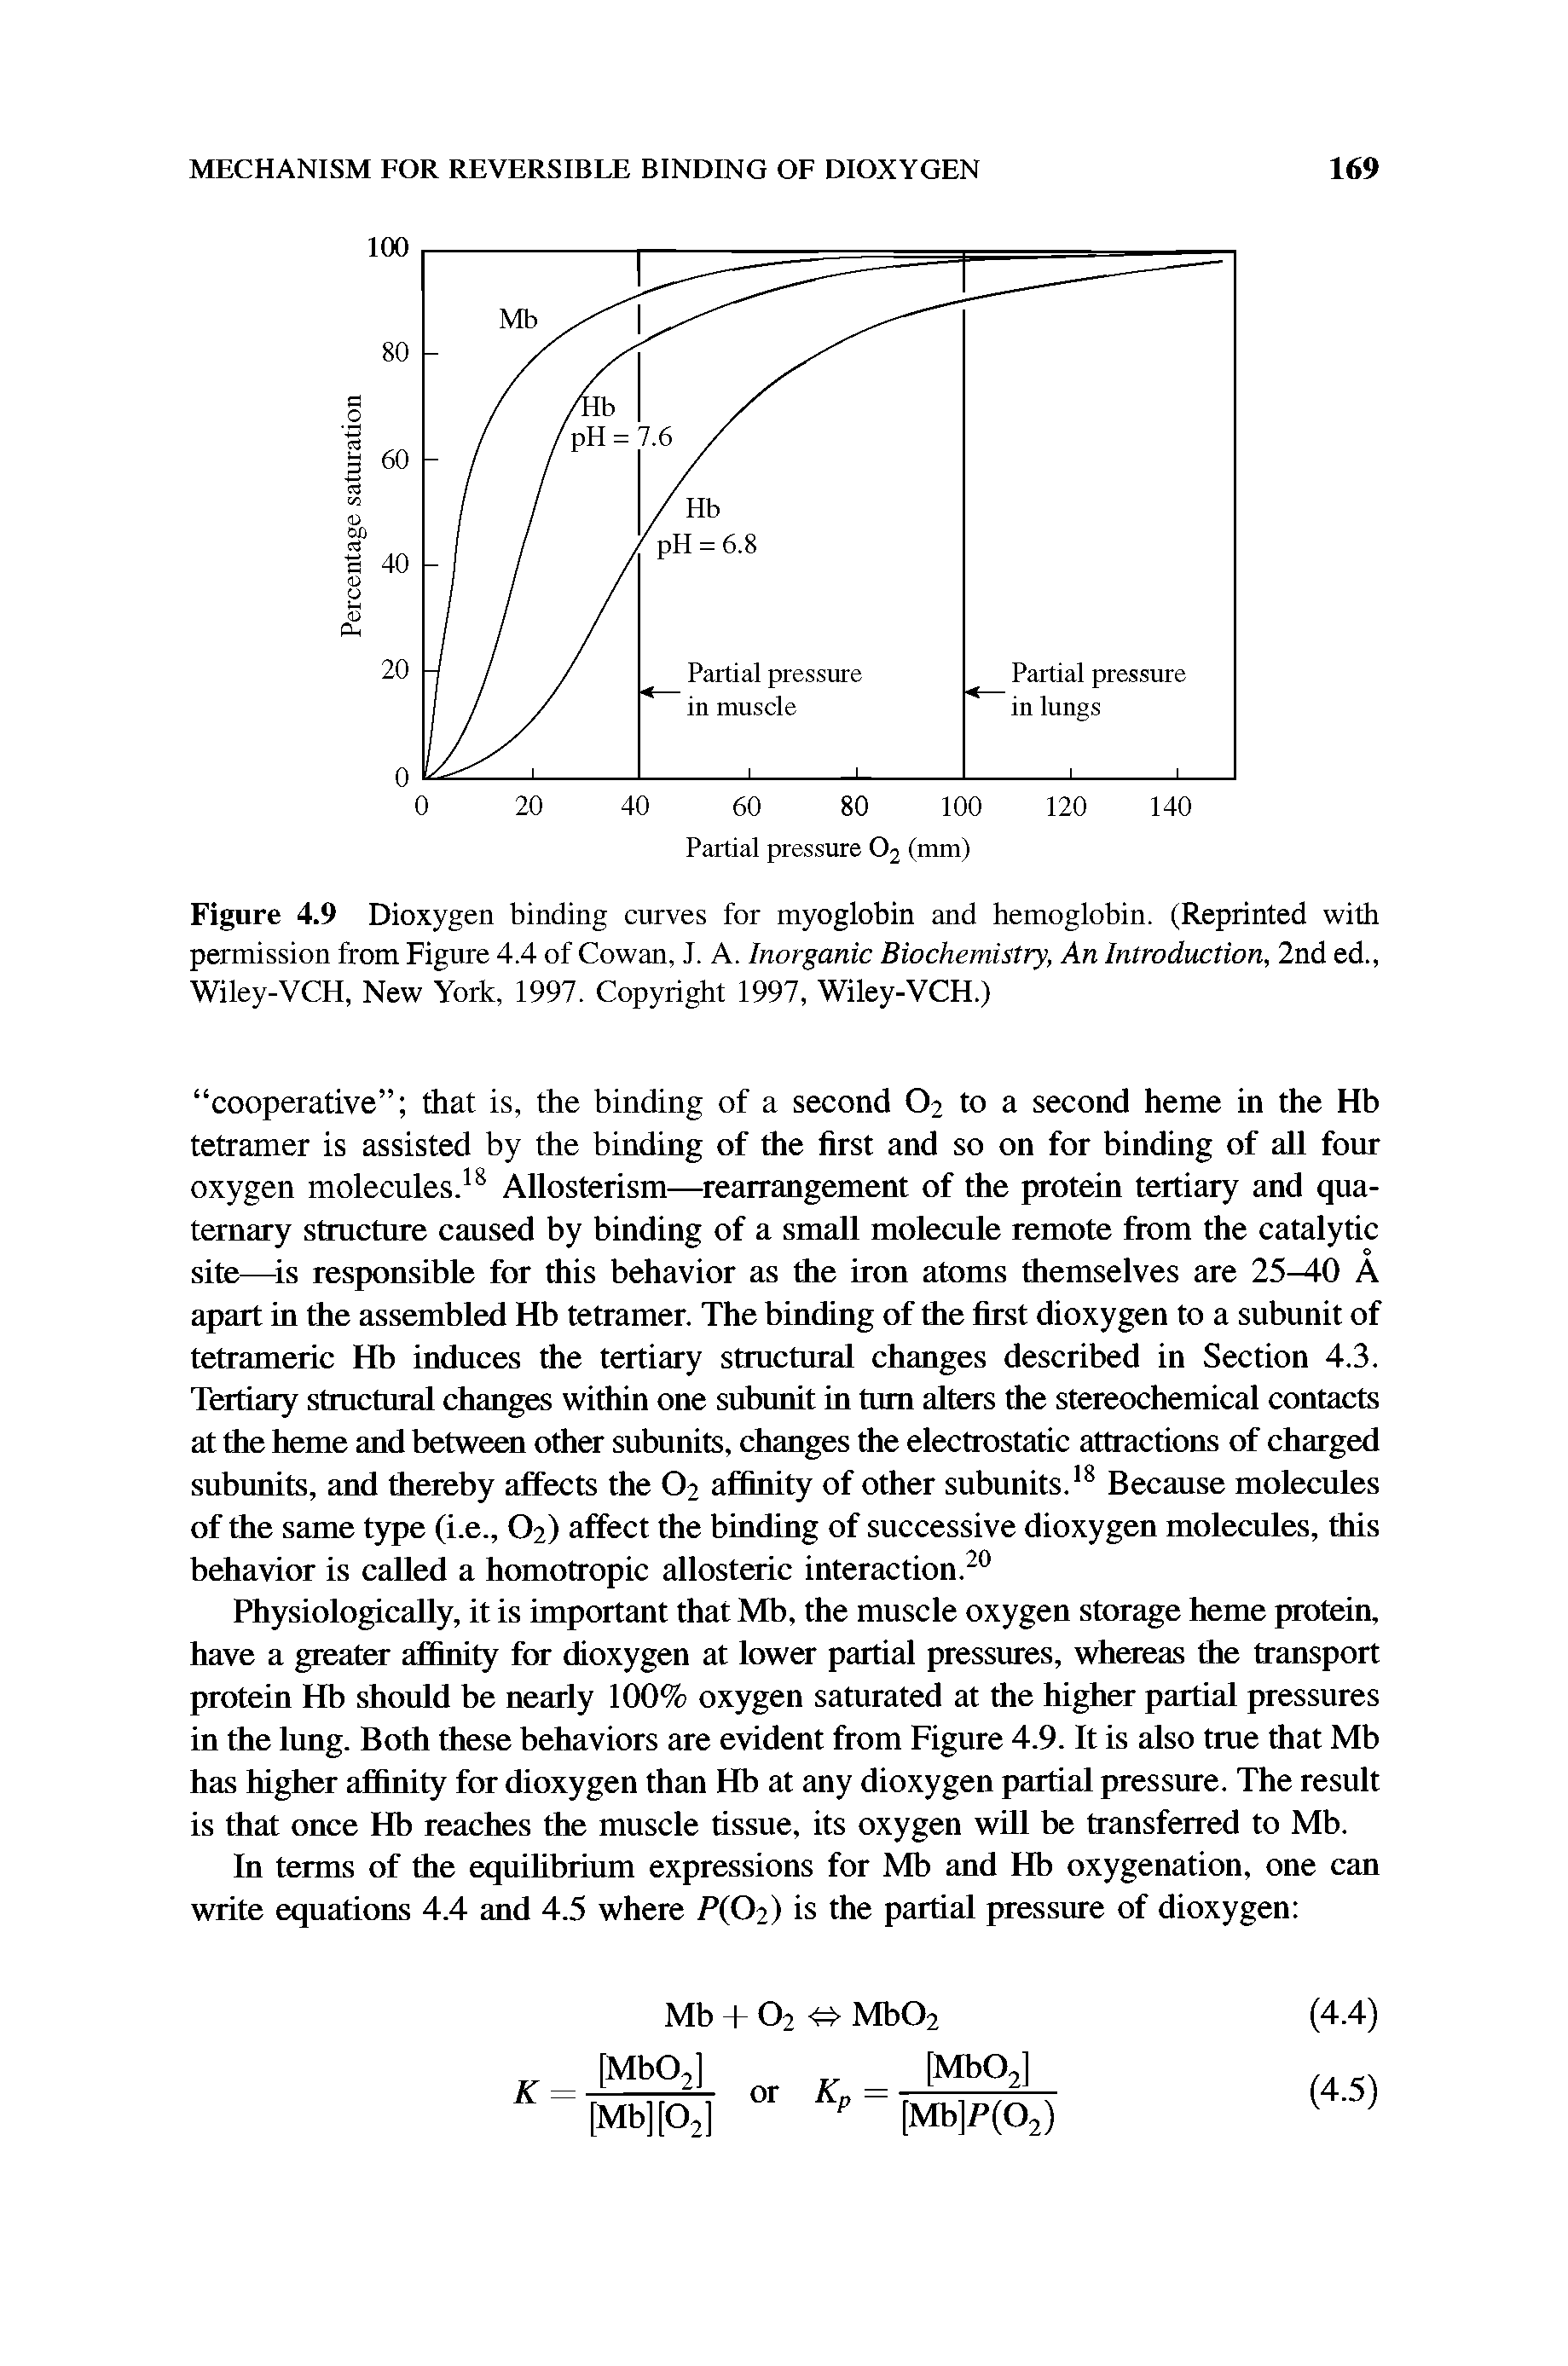 Figure 4.9 Dioxygen binding curves for myoglobin and hemoglobin. (Reprinted with permission from Figure 4.4 of Cowan, J. A. Inorganic Biochemistry, An Introduction, 2nd ed., Wiley-VCH, New York, 1997. Copyright 1997, Wiley-VCH.)...